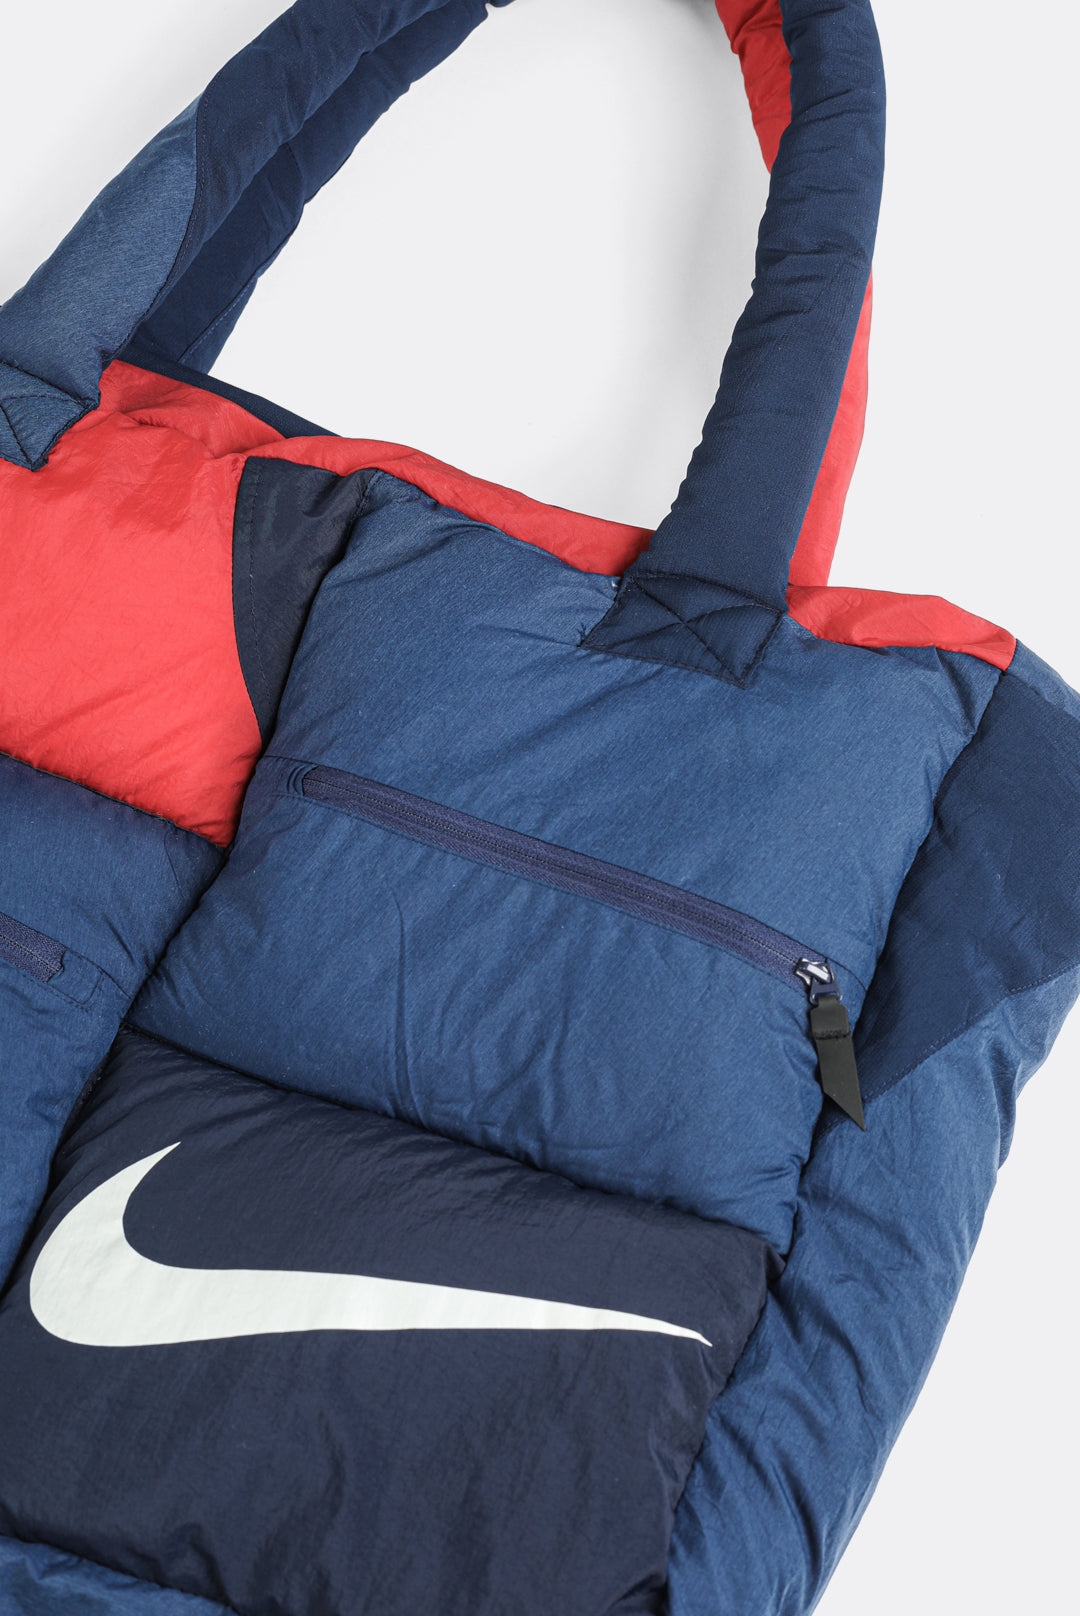 Rework Nike Puffer Tote Bag – Frankie Collective